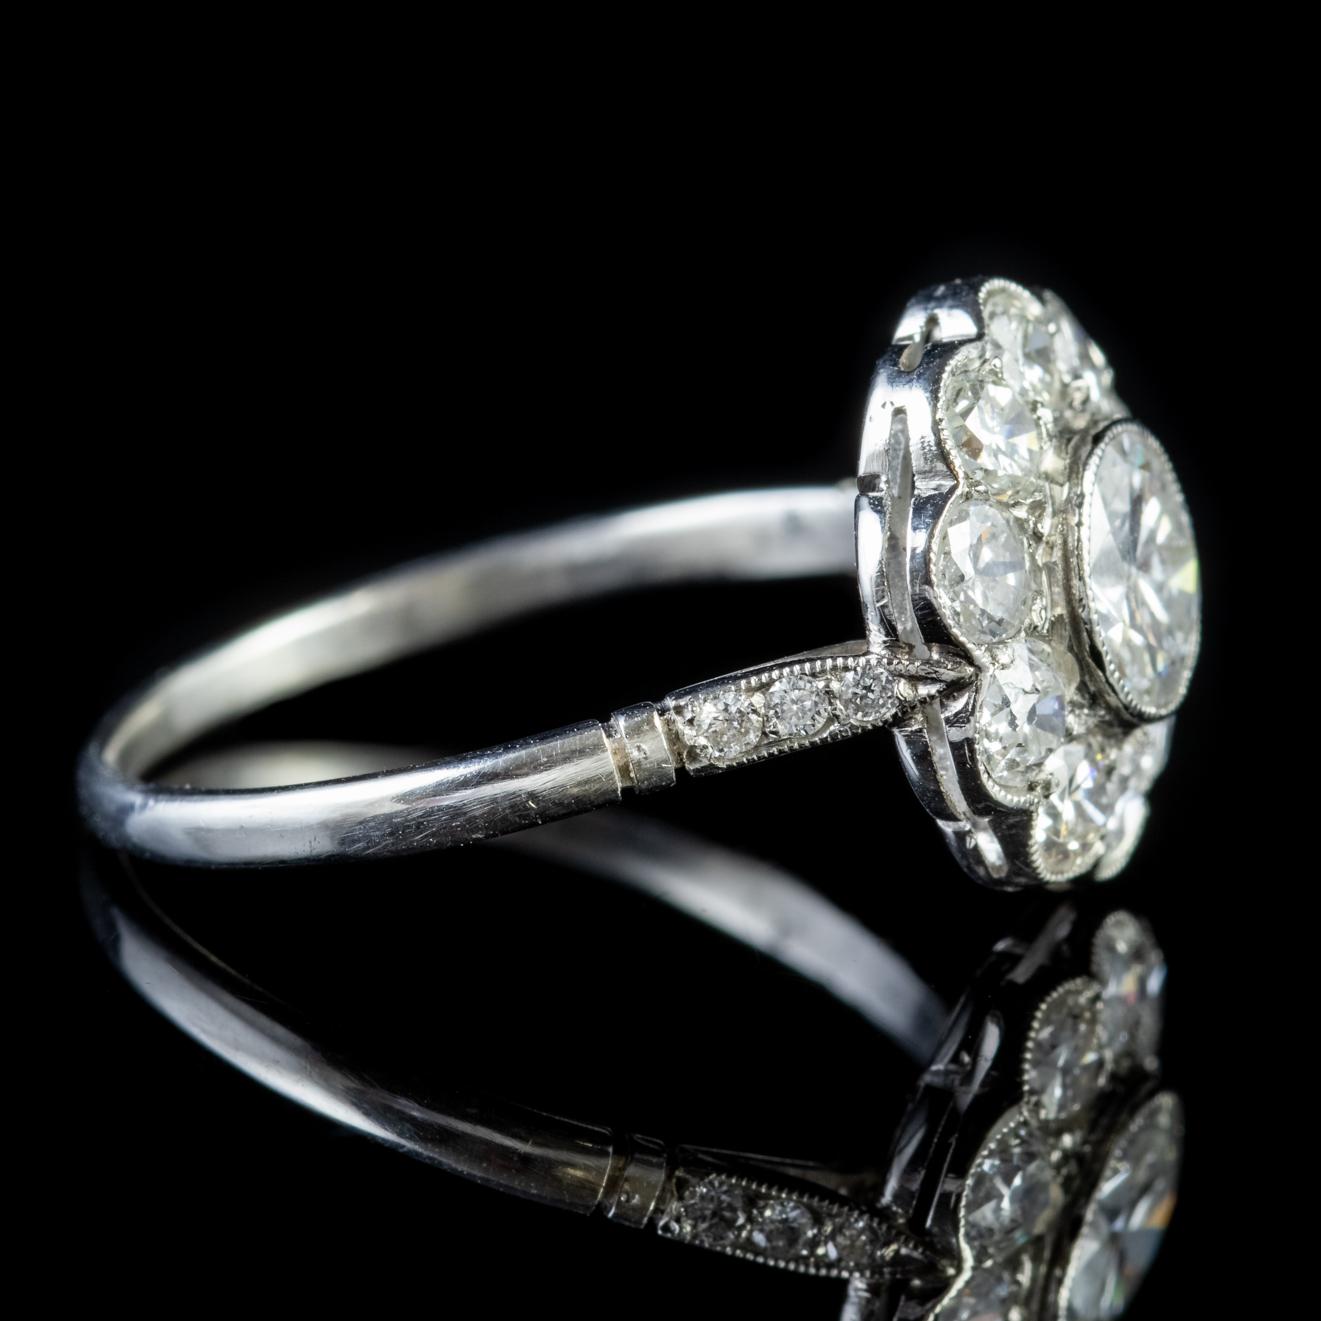 This unique Diamond cluster ring was created at the end of the Edwardian period and boasts ten old cut Diamonds mounted in an 18ct White Gold gallery. 

The central stone is 0.65ct surrounded by 0.1ct Diamonds, giving the ring a total of 1.80ct. The